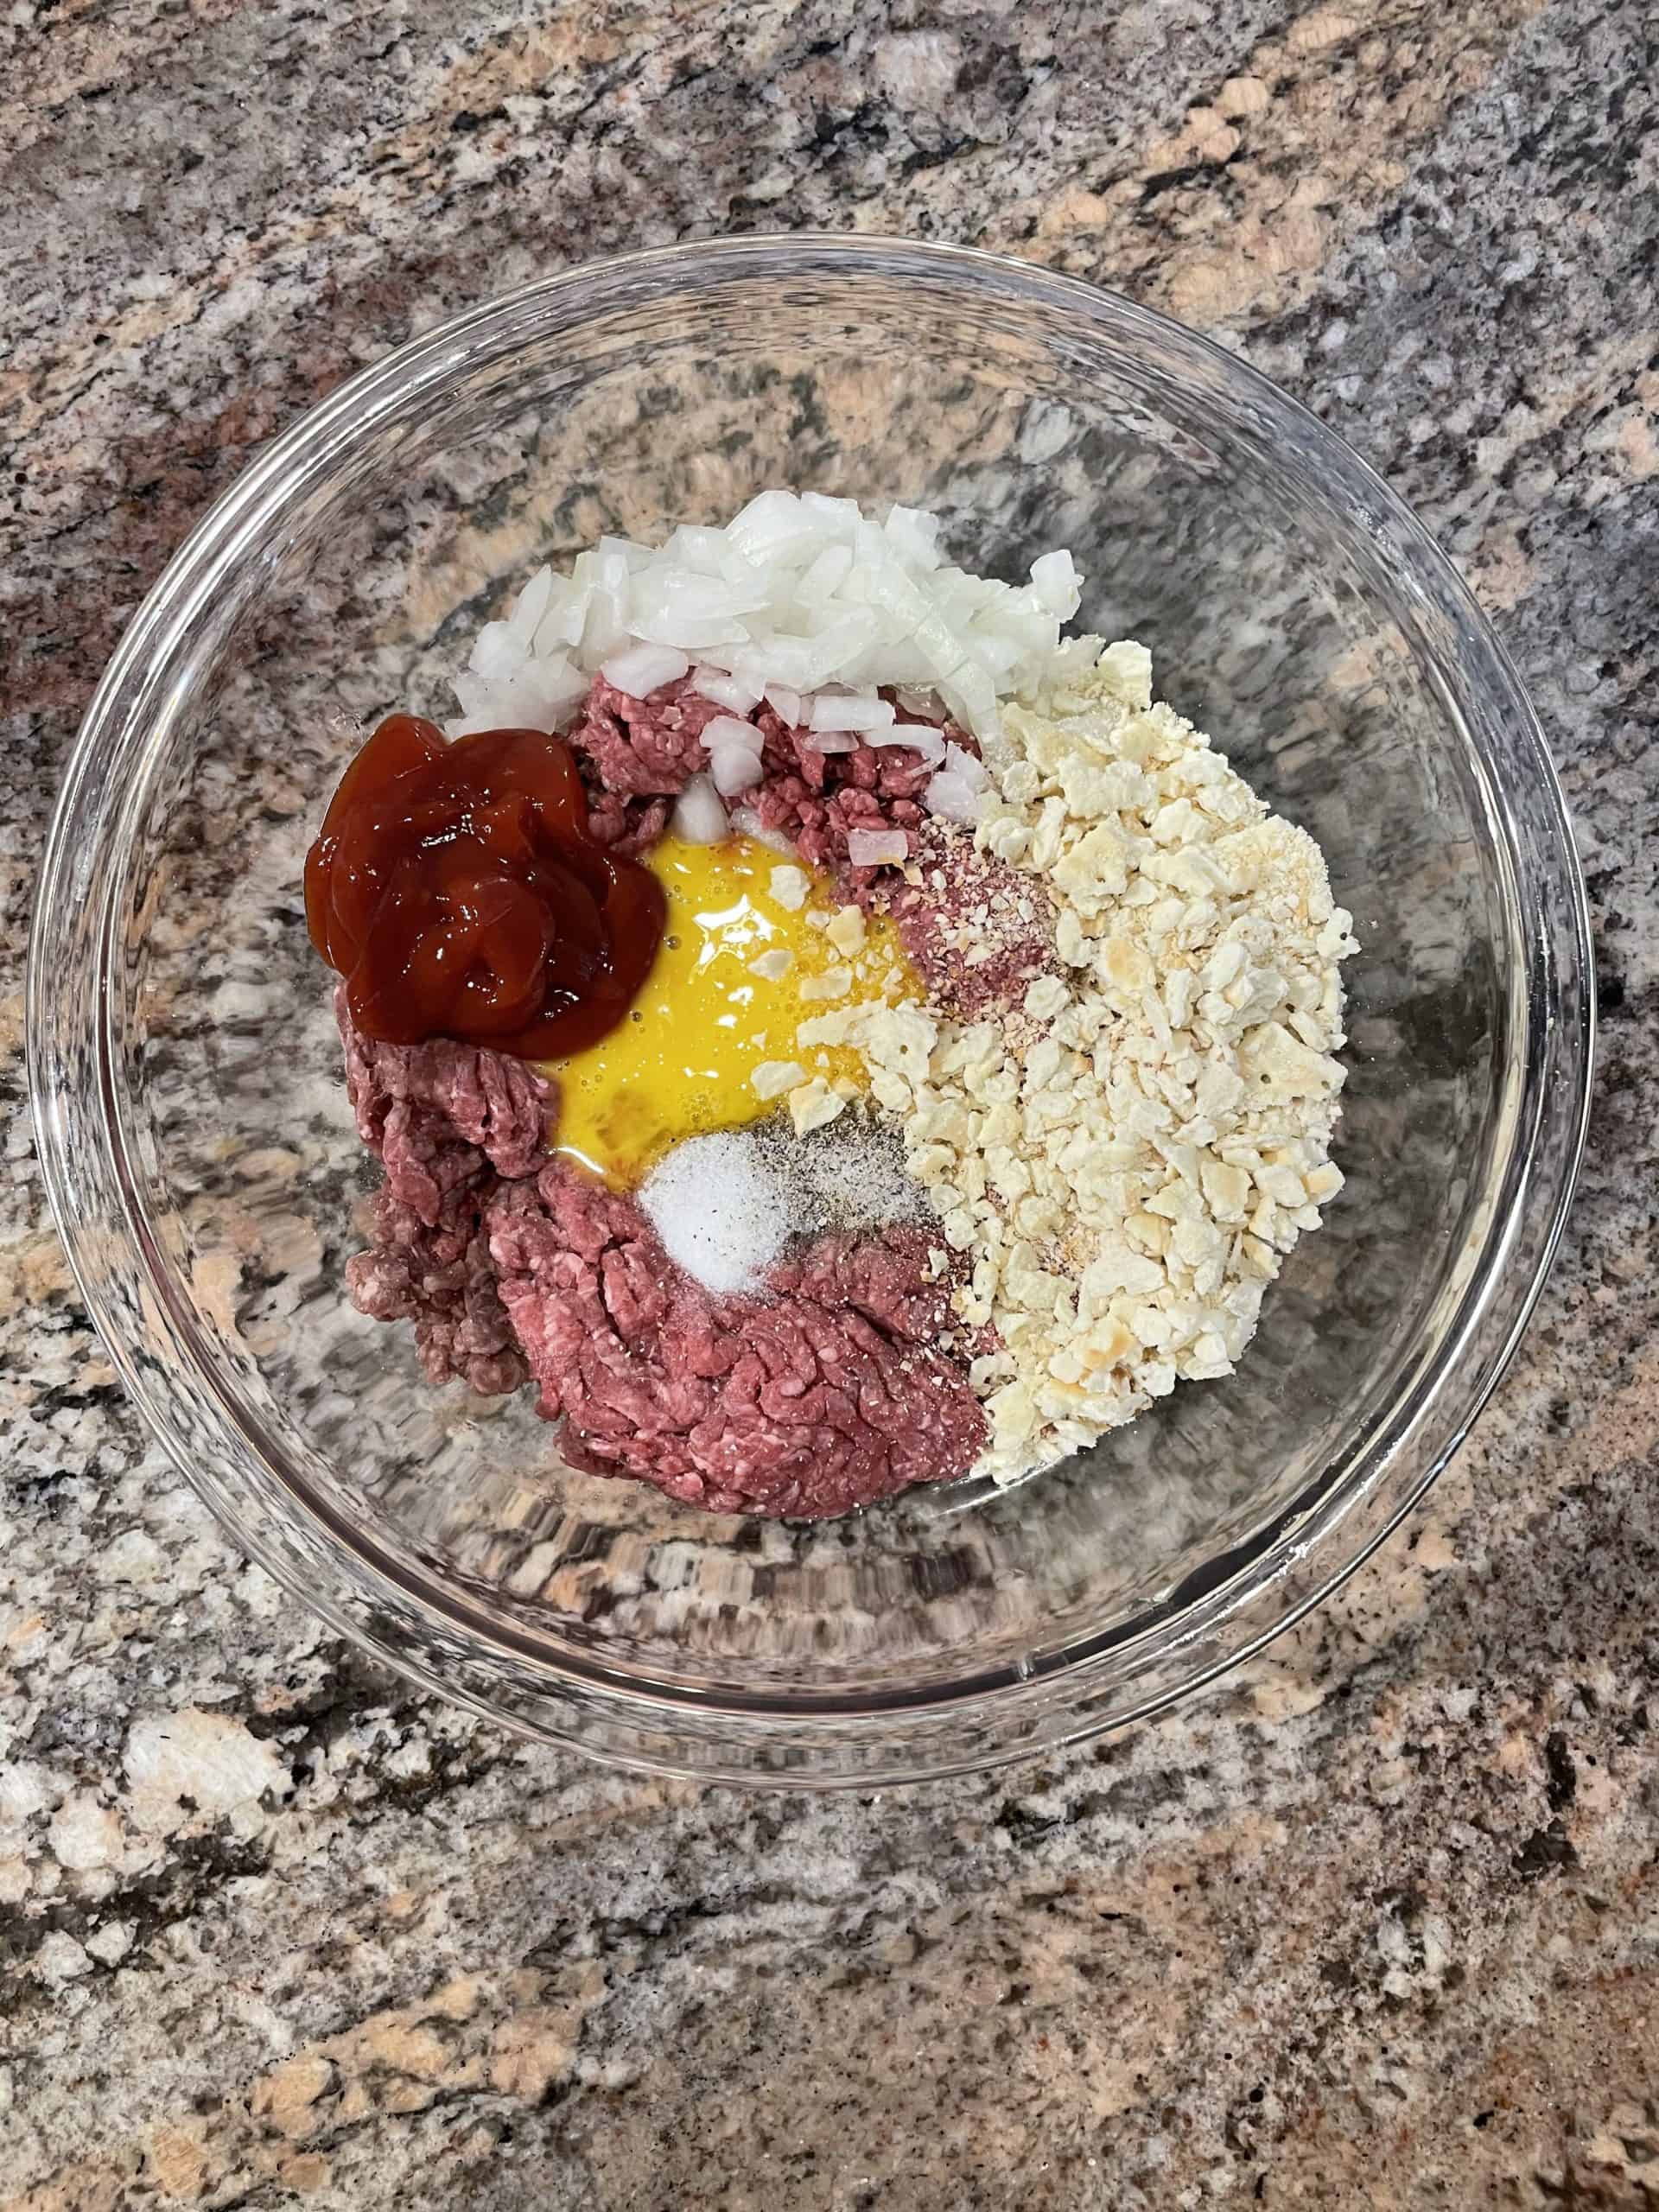 Combine the Hamburger, egg, diced onion, crushed crackers, ketchup, 1/2 the salt and pepper.